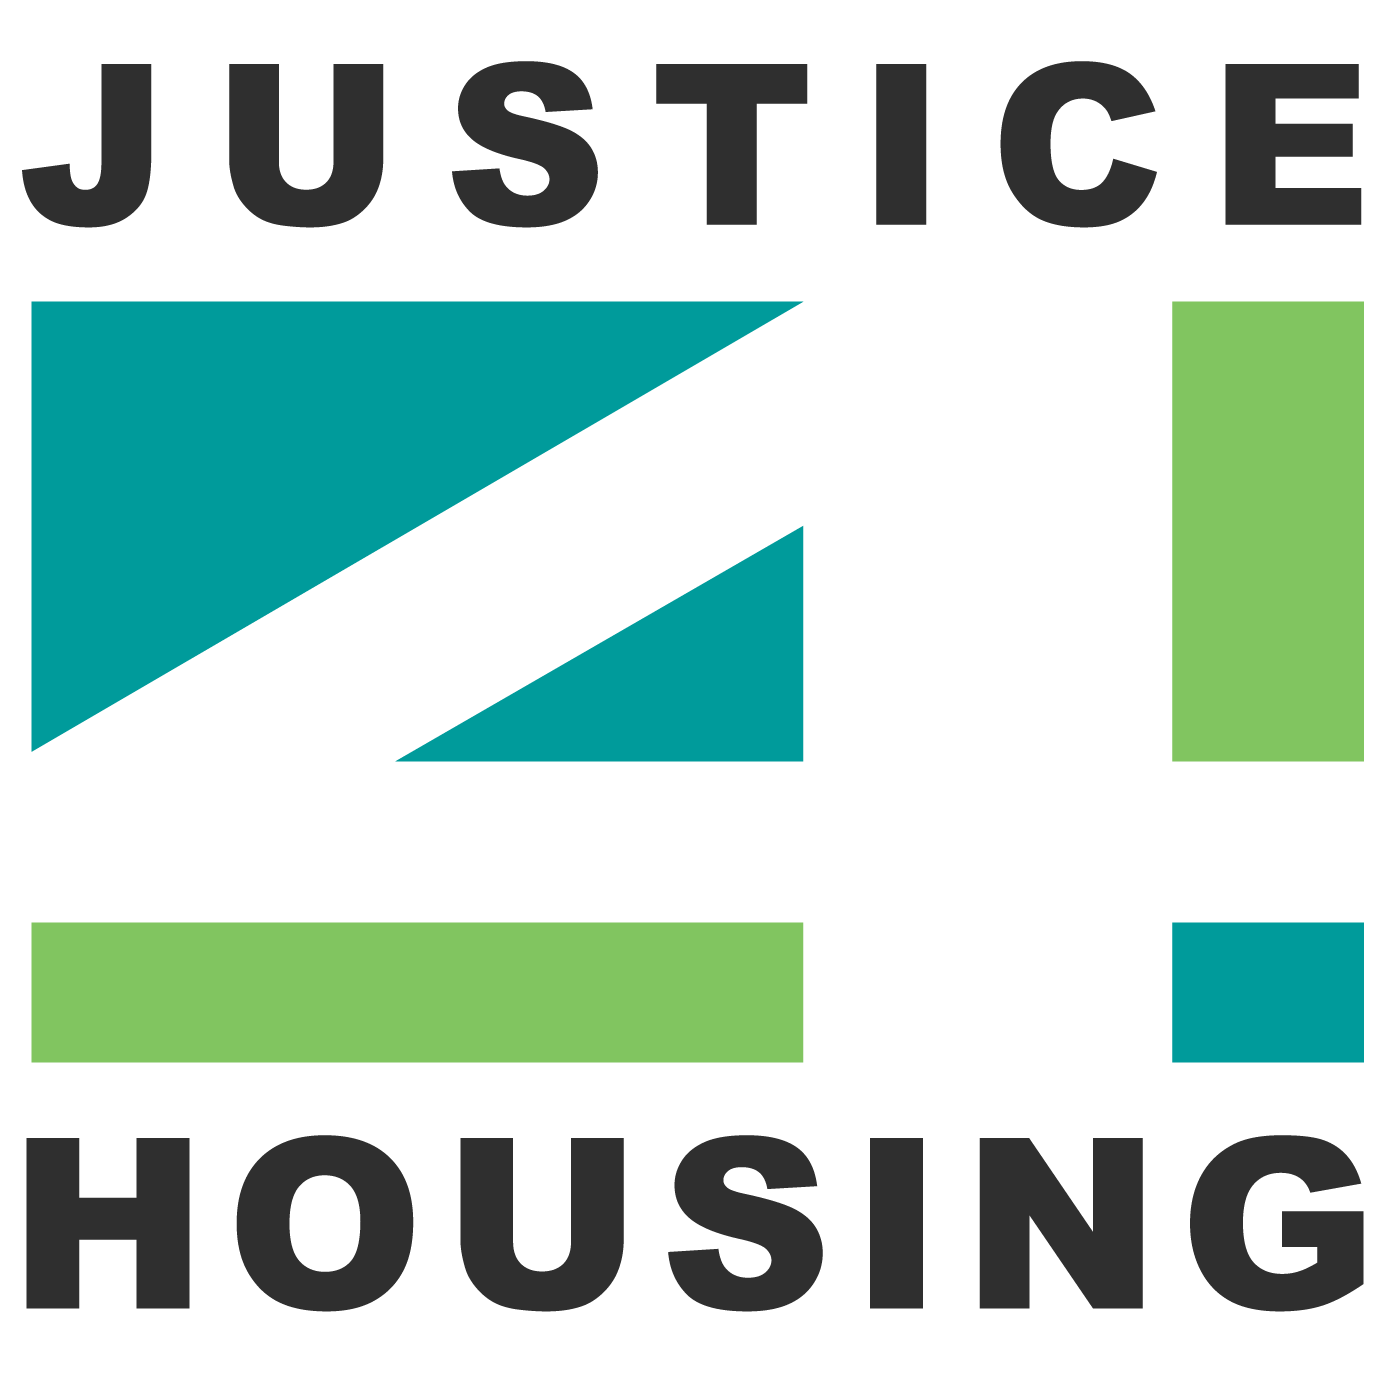 Justice 4 Housing